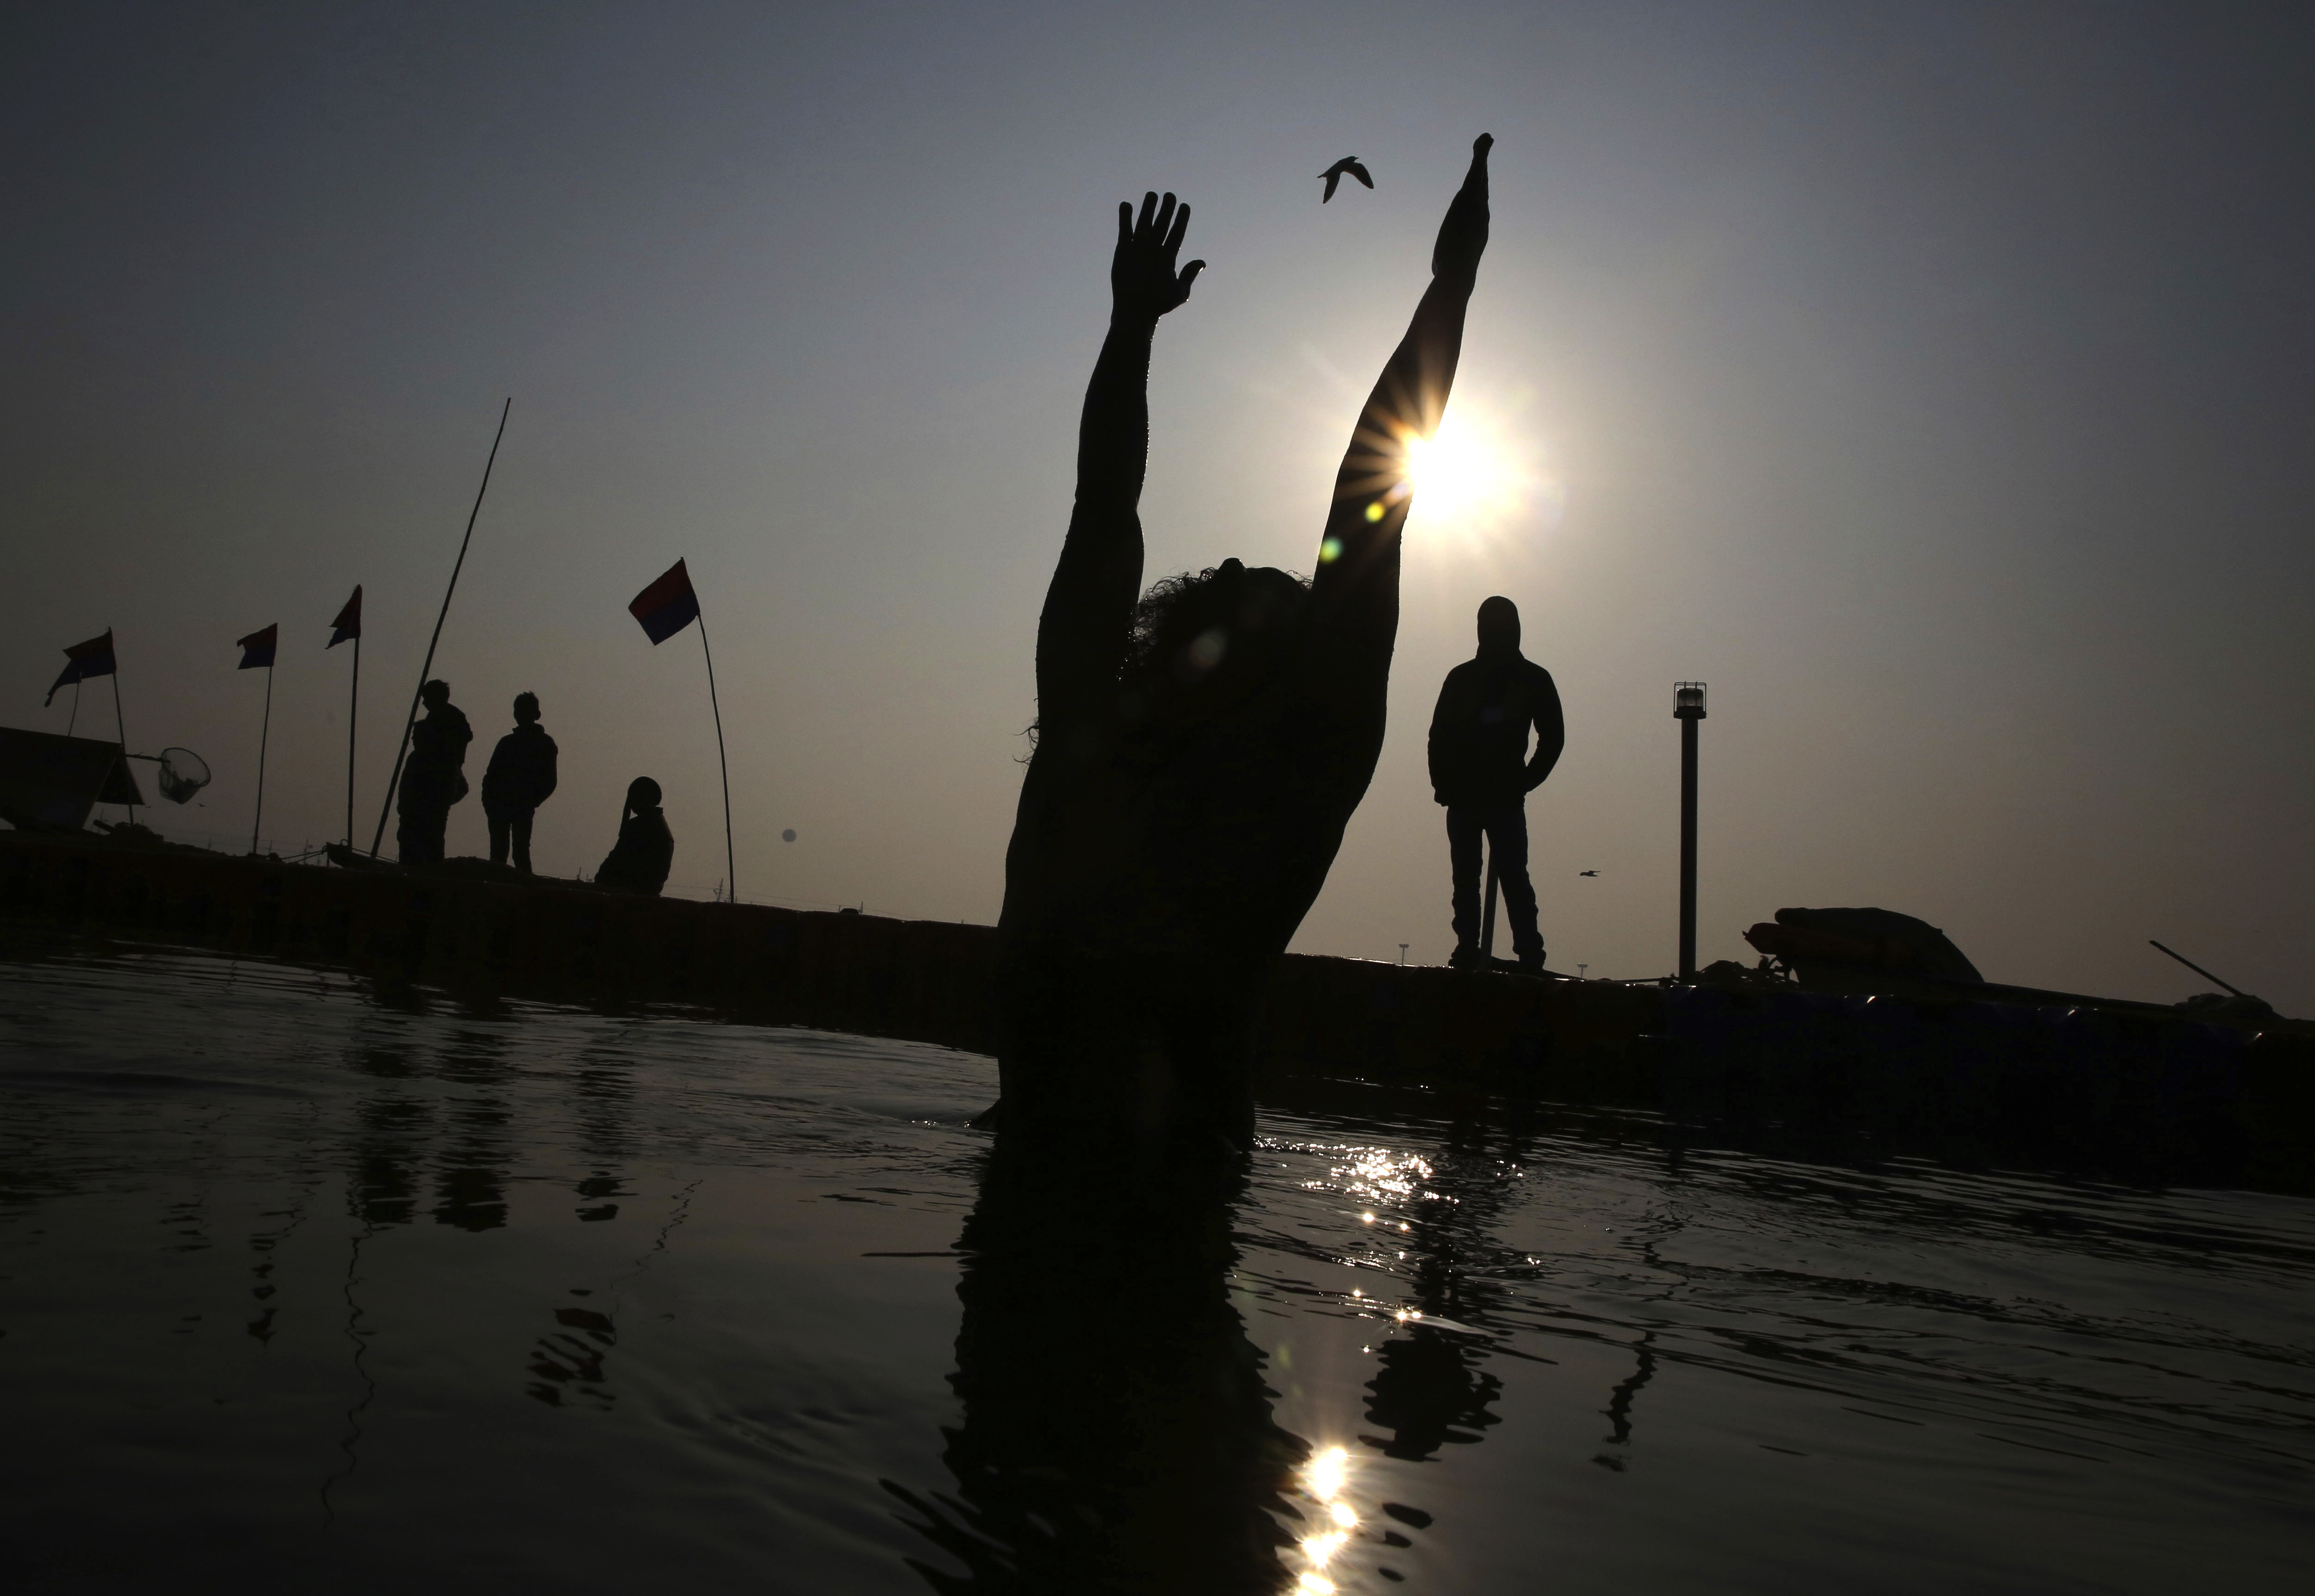 A Hindu devotees takes ritualistic dips at Sangam during Kumbh Mela or Pitcher festival at Prayagraj Uttar Pradesh state, India, Monday, Jan. 21, 2019. The Kumbh Mela is a series of ritual baths by Hindu holy men, and other pilgrims at Sangam, the confluence of three sacred rivers the Yamuna, the Ganges and the mythical Saraswati that dates back to at least medieval times. The city's Mughal-era name Allahabad was recently changed to Prayagraj. (AP Photo/Rajesh Kumar Singh)